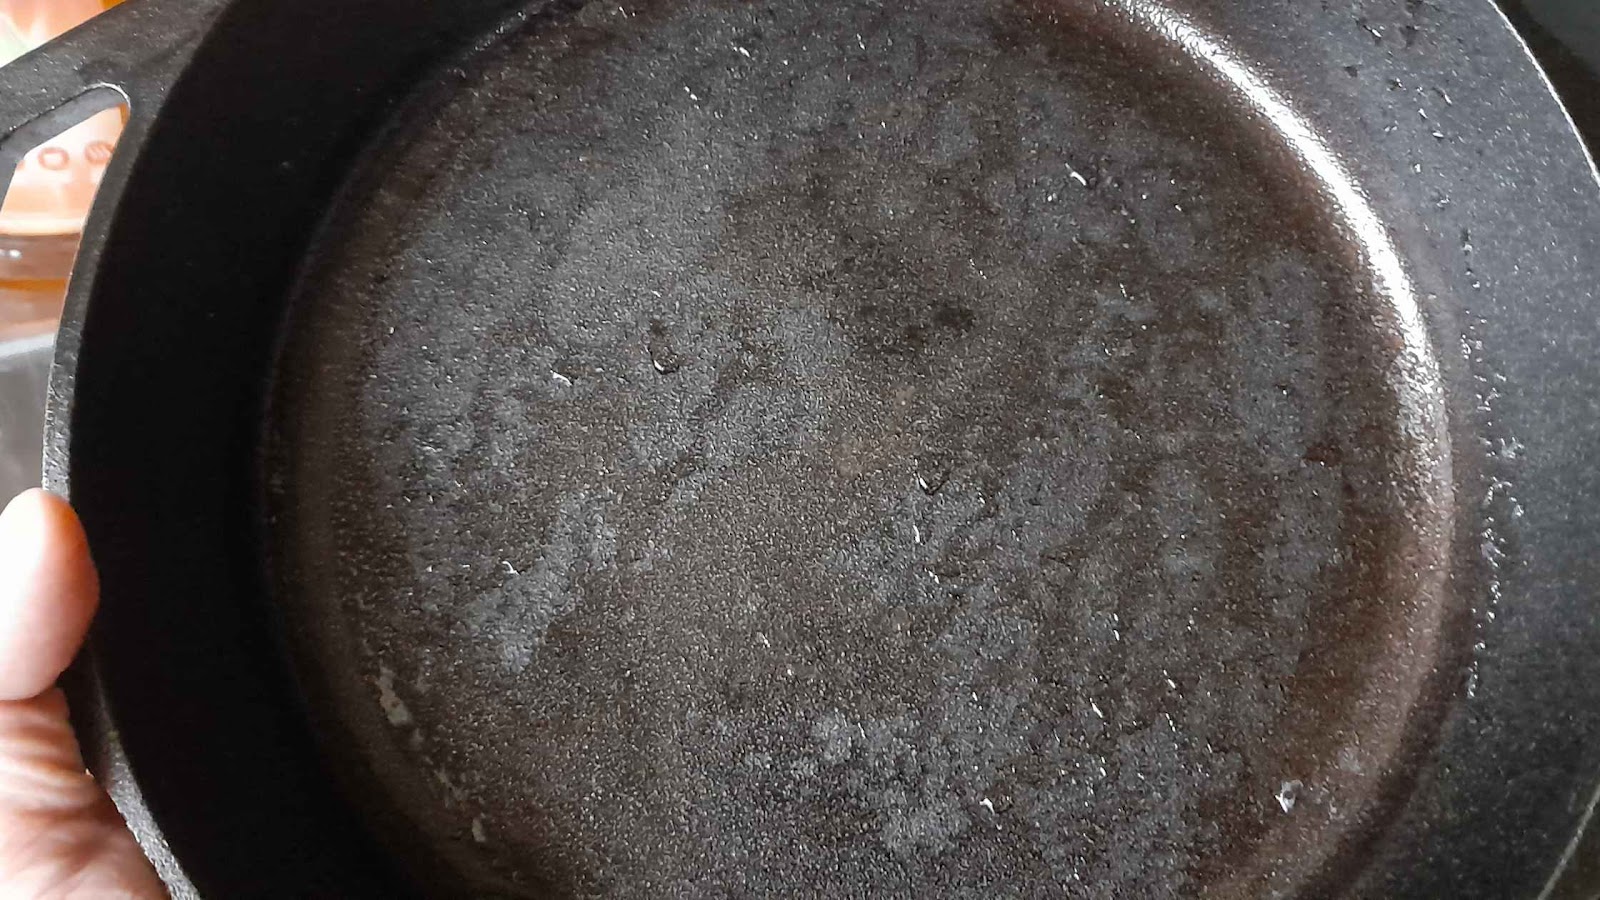 Skillet after pouring out water and vinegar solution.